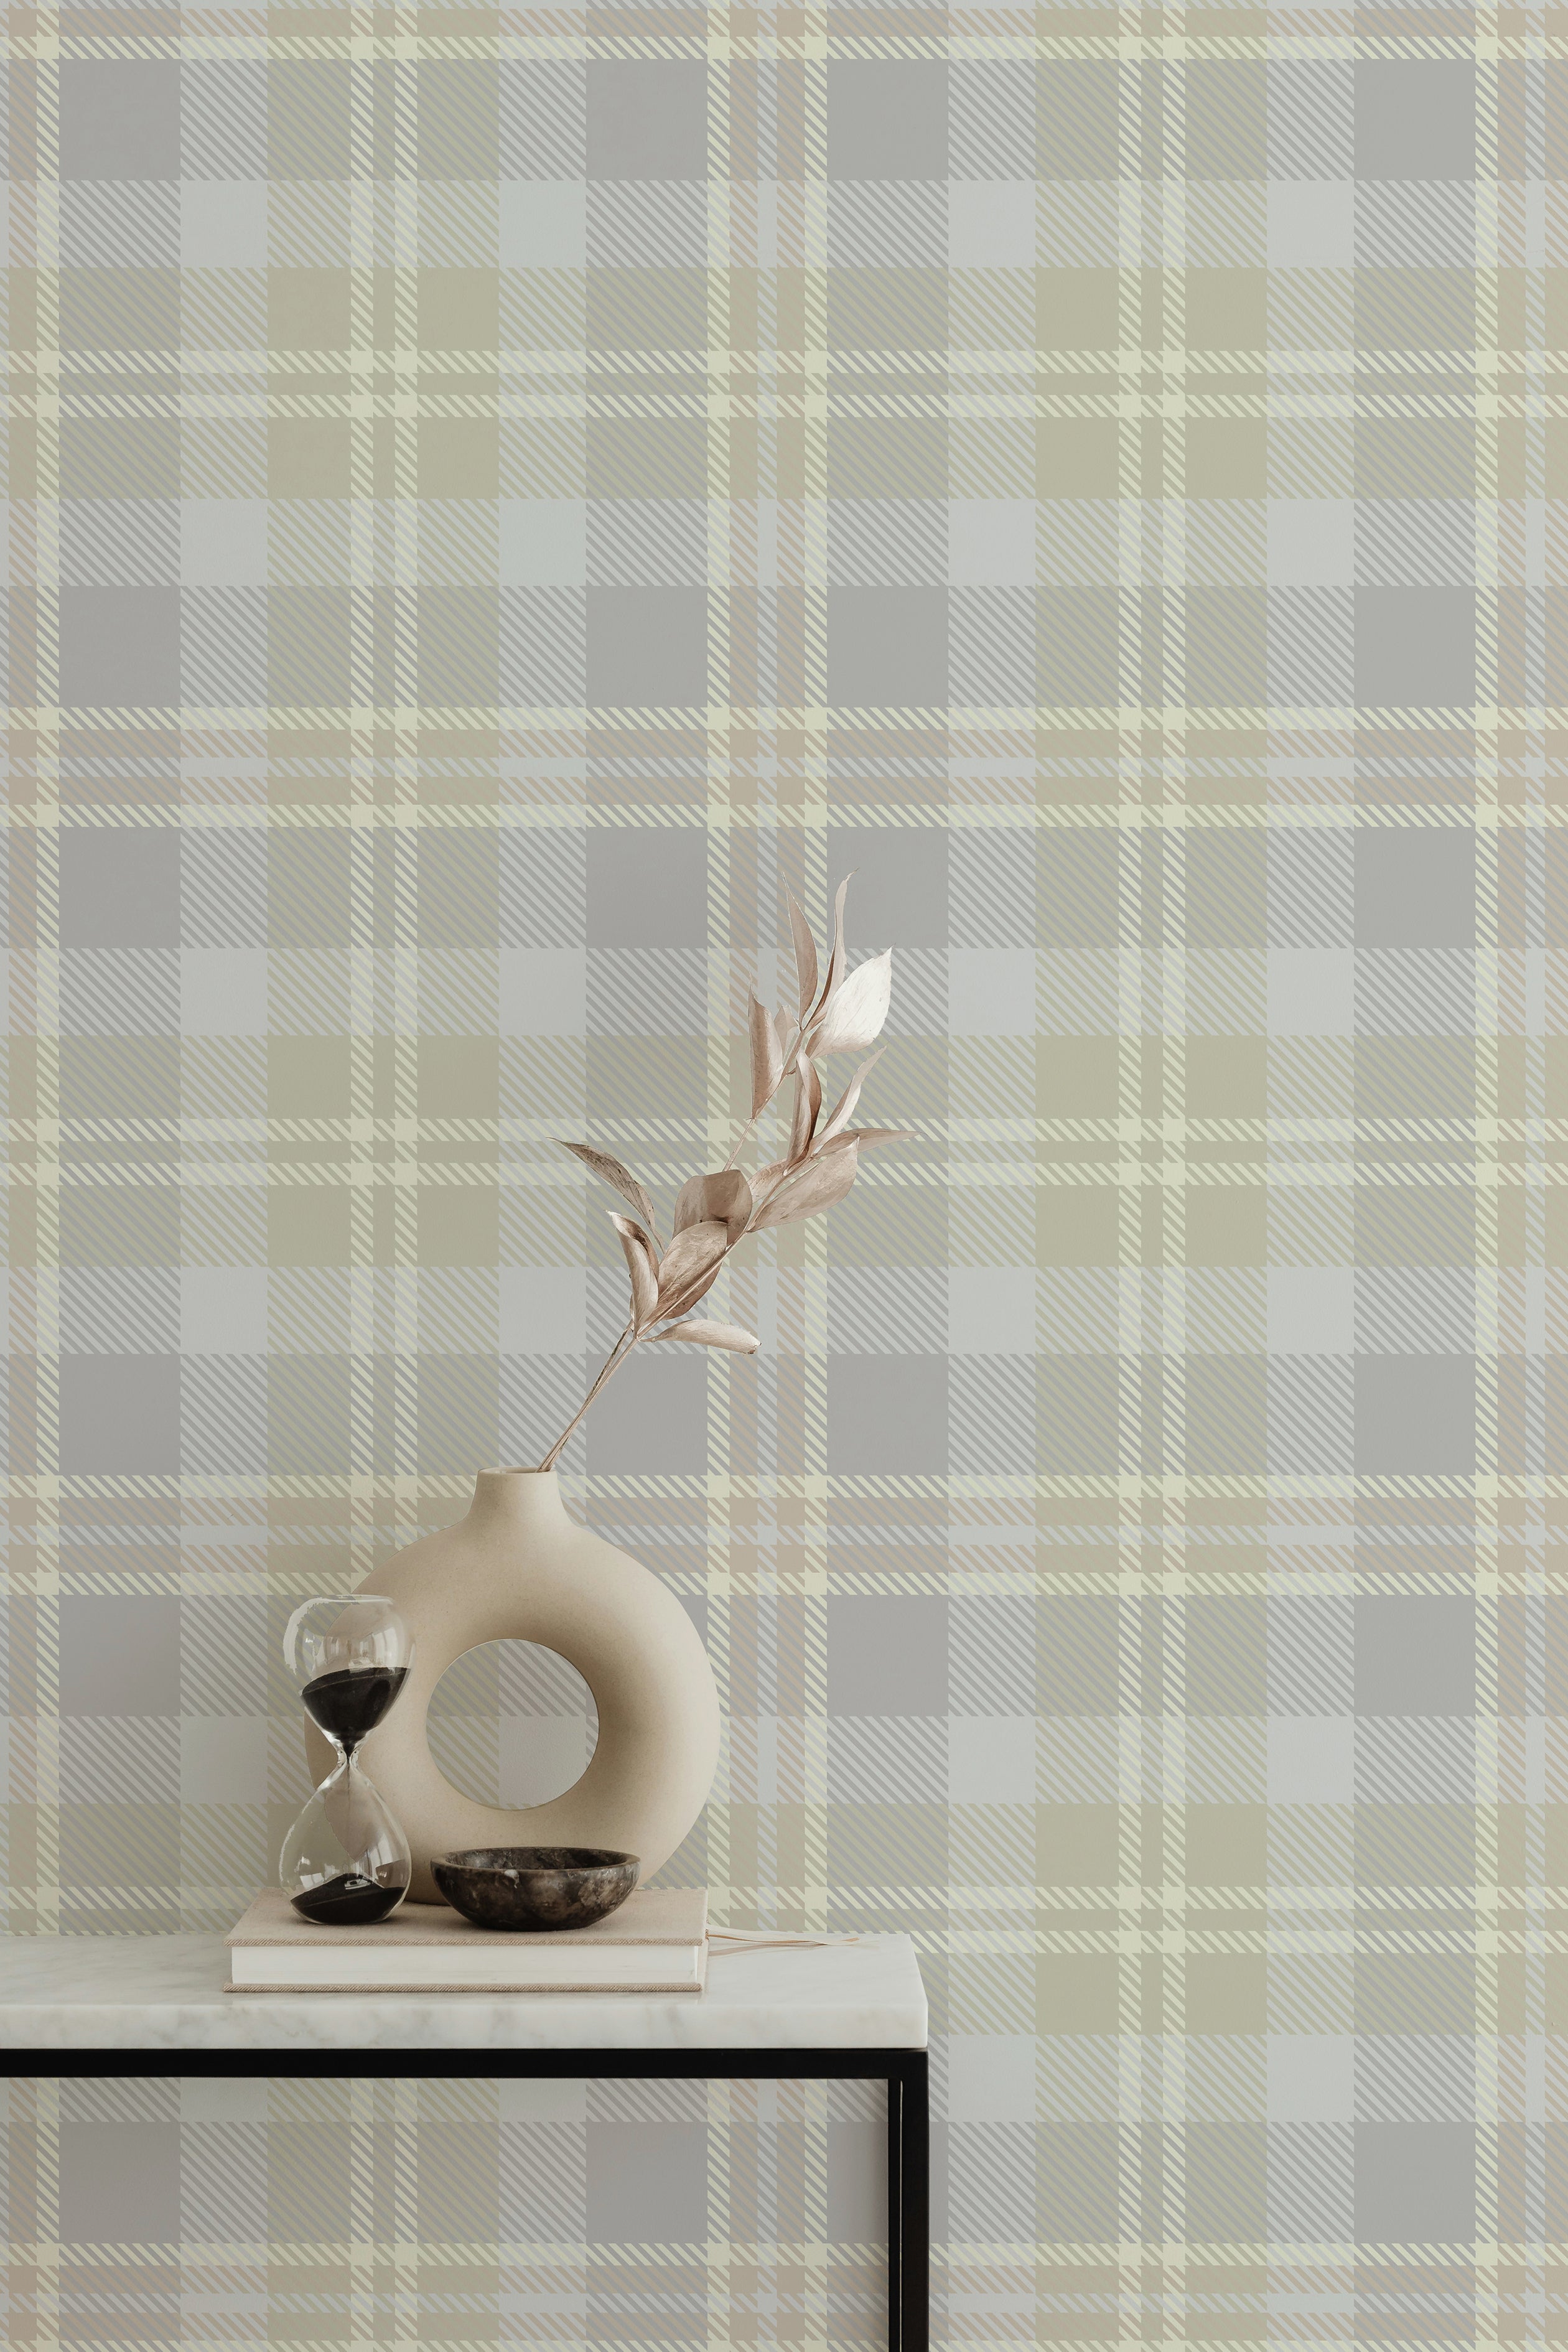 Interior with Heirloom Tartan Plaid Wallpaper, highlighting its classic tartan pattern in neutral shades of gray, beige, and white. The wallpaper creates a warm and inviting backdrop, accented by a stylish vase and decor on a console table.